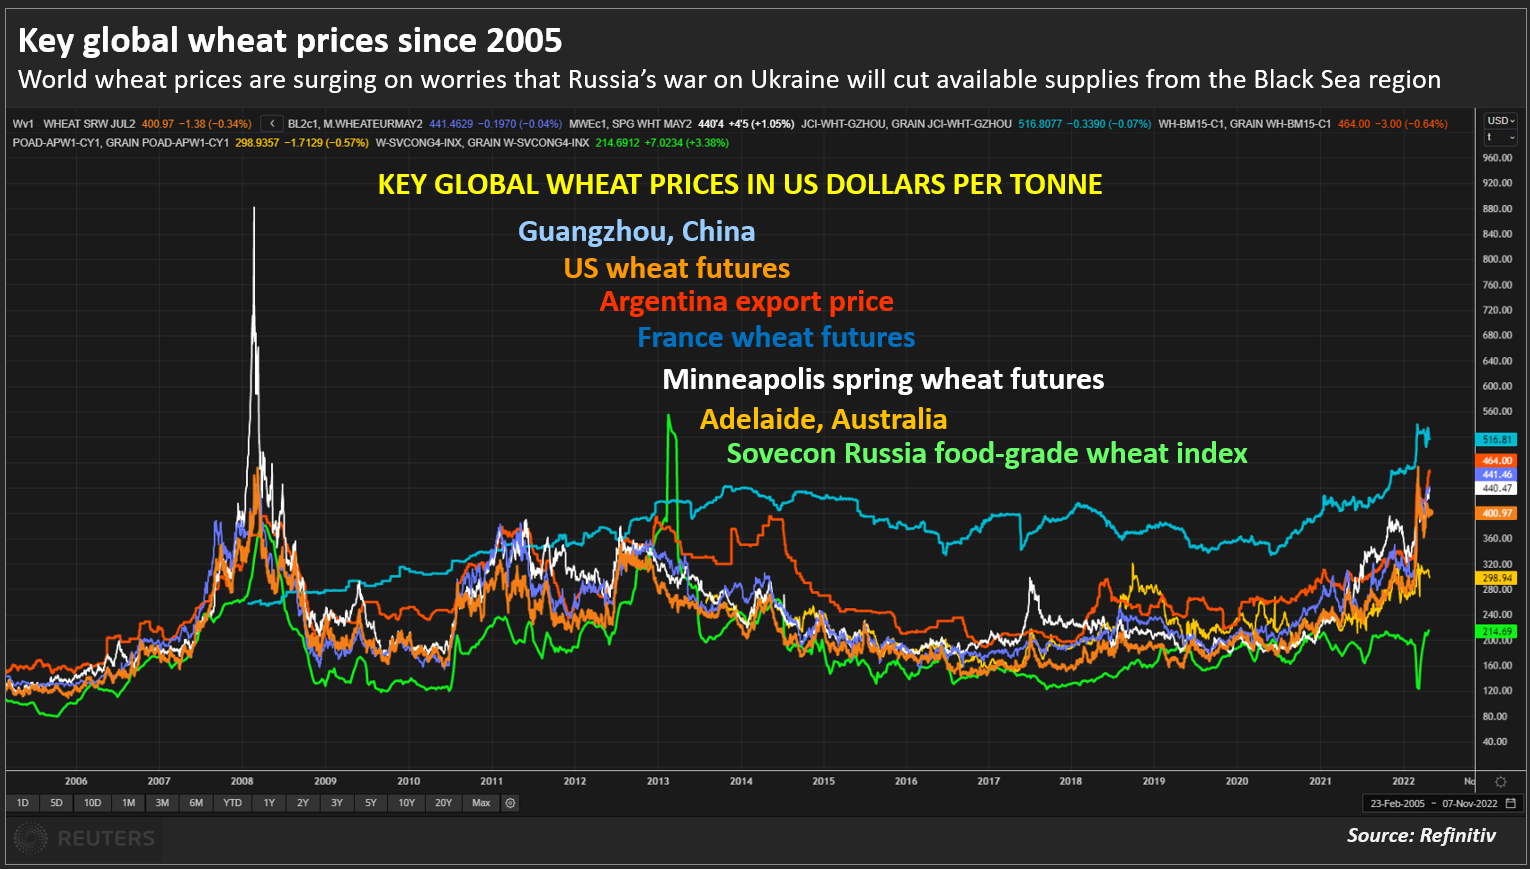 World wheat prices since 2005